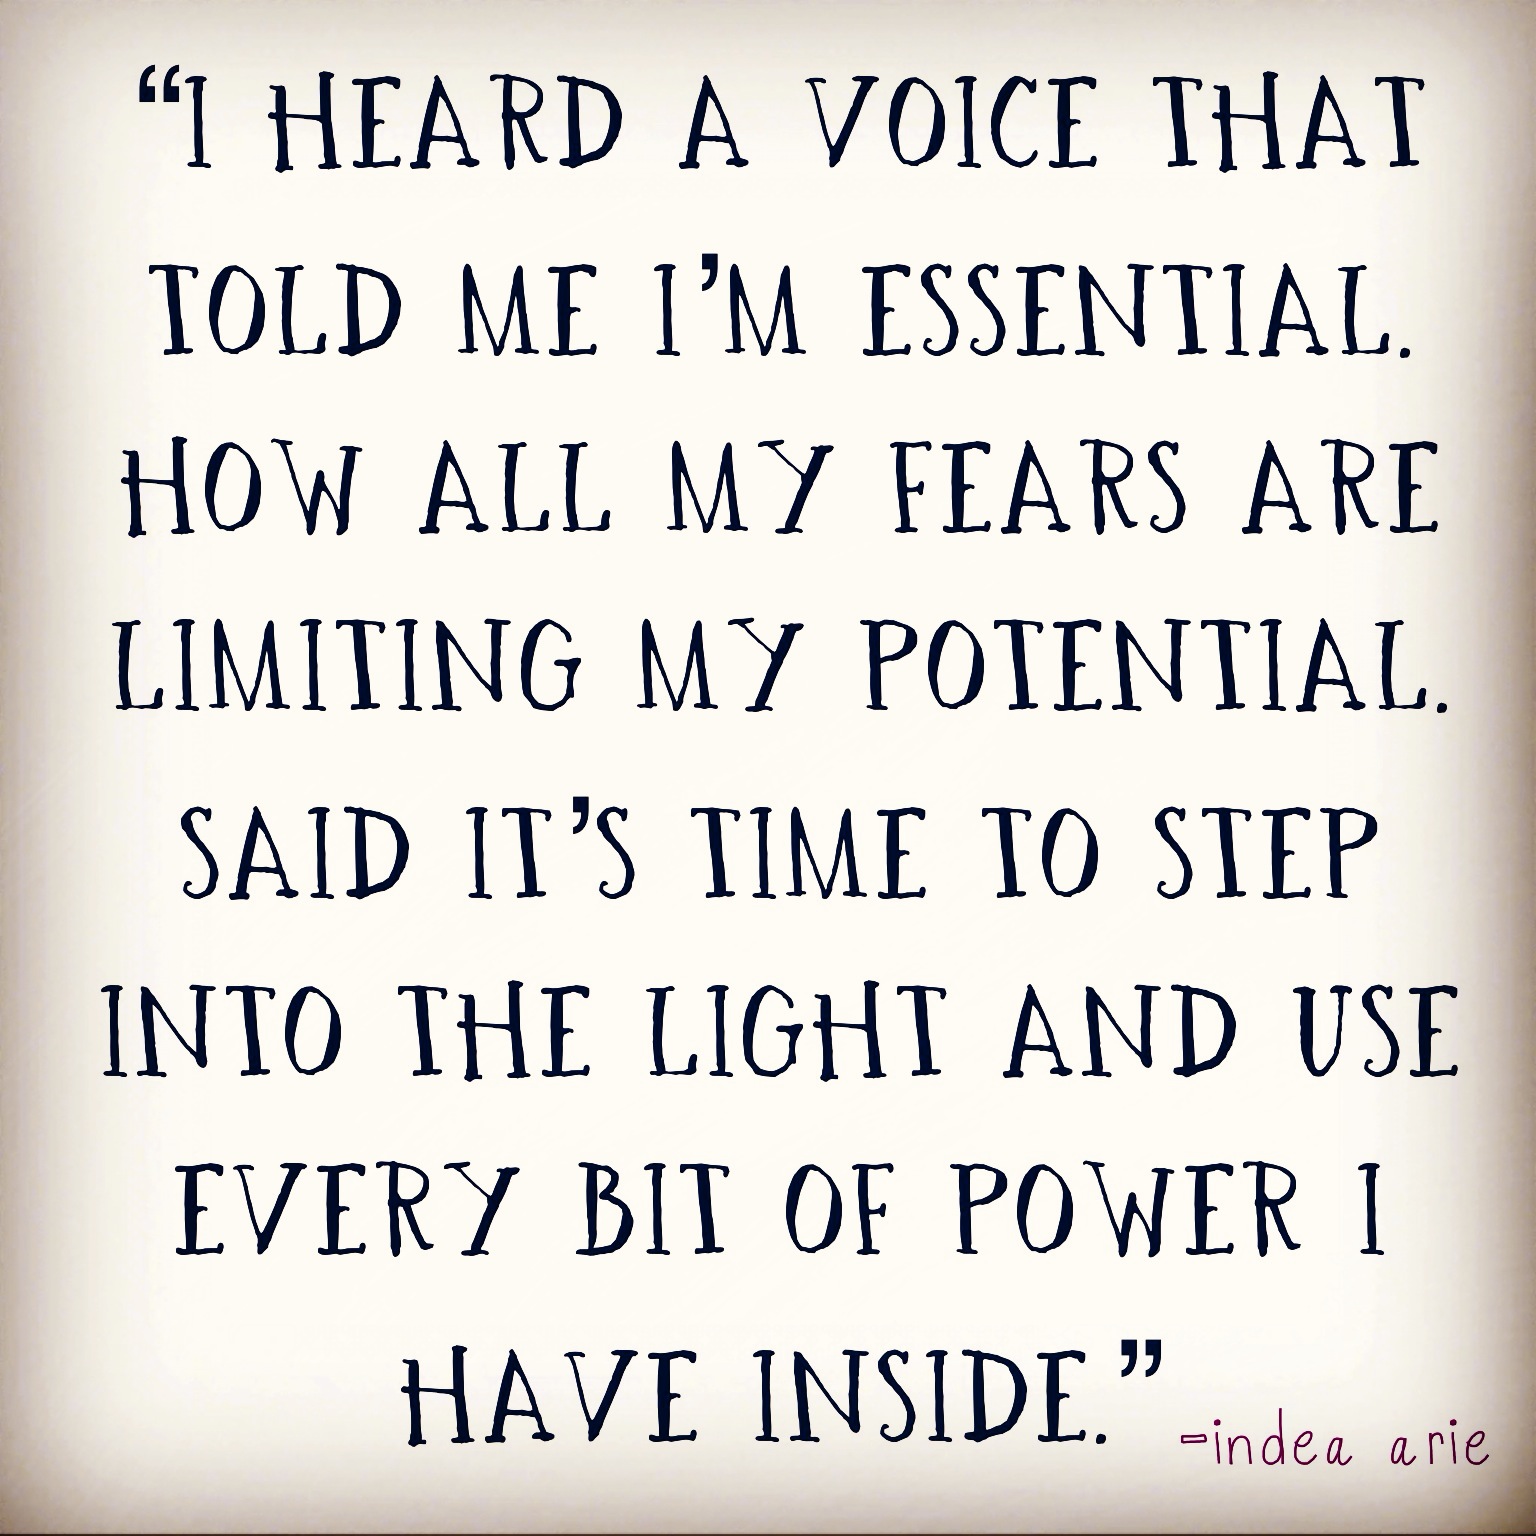 I heard a voice that told me I'm essential. How all my fears are limiting my potential. Said it's time to step into the light and use every bit of power i have inside. Indea Arie